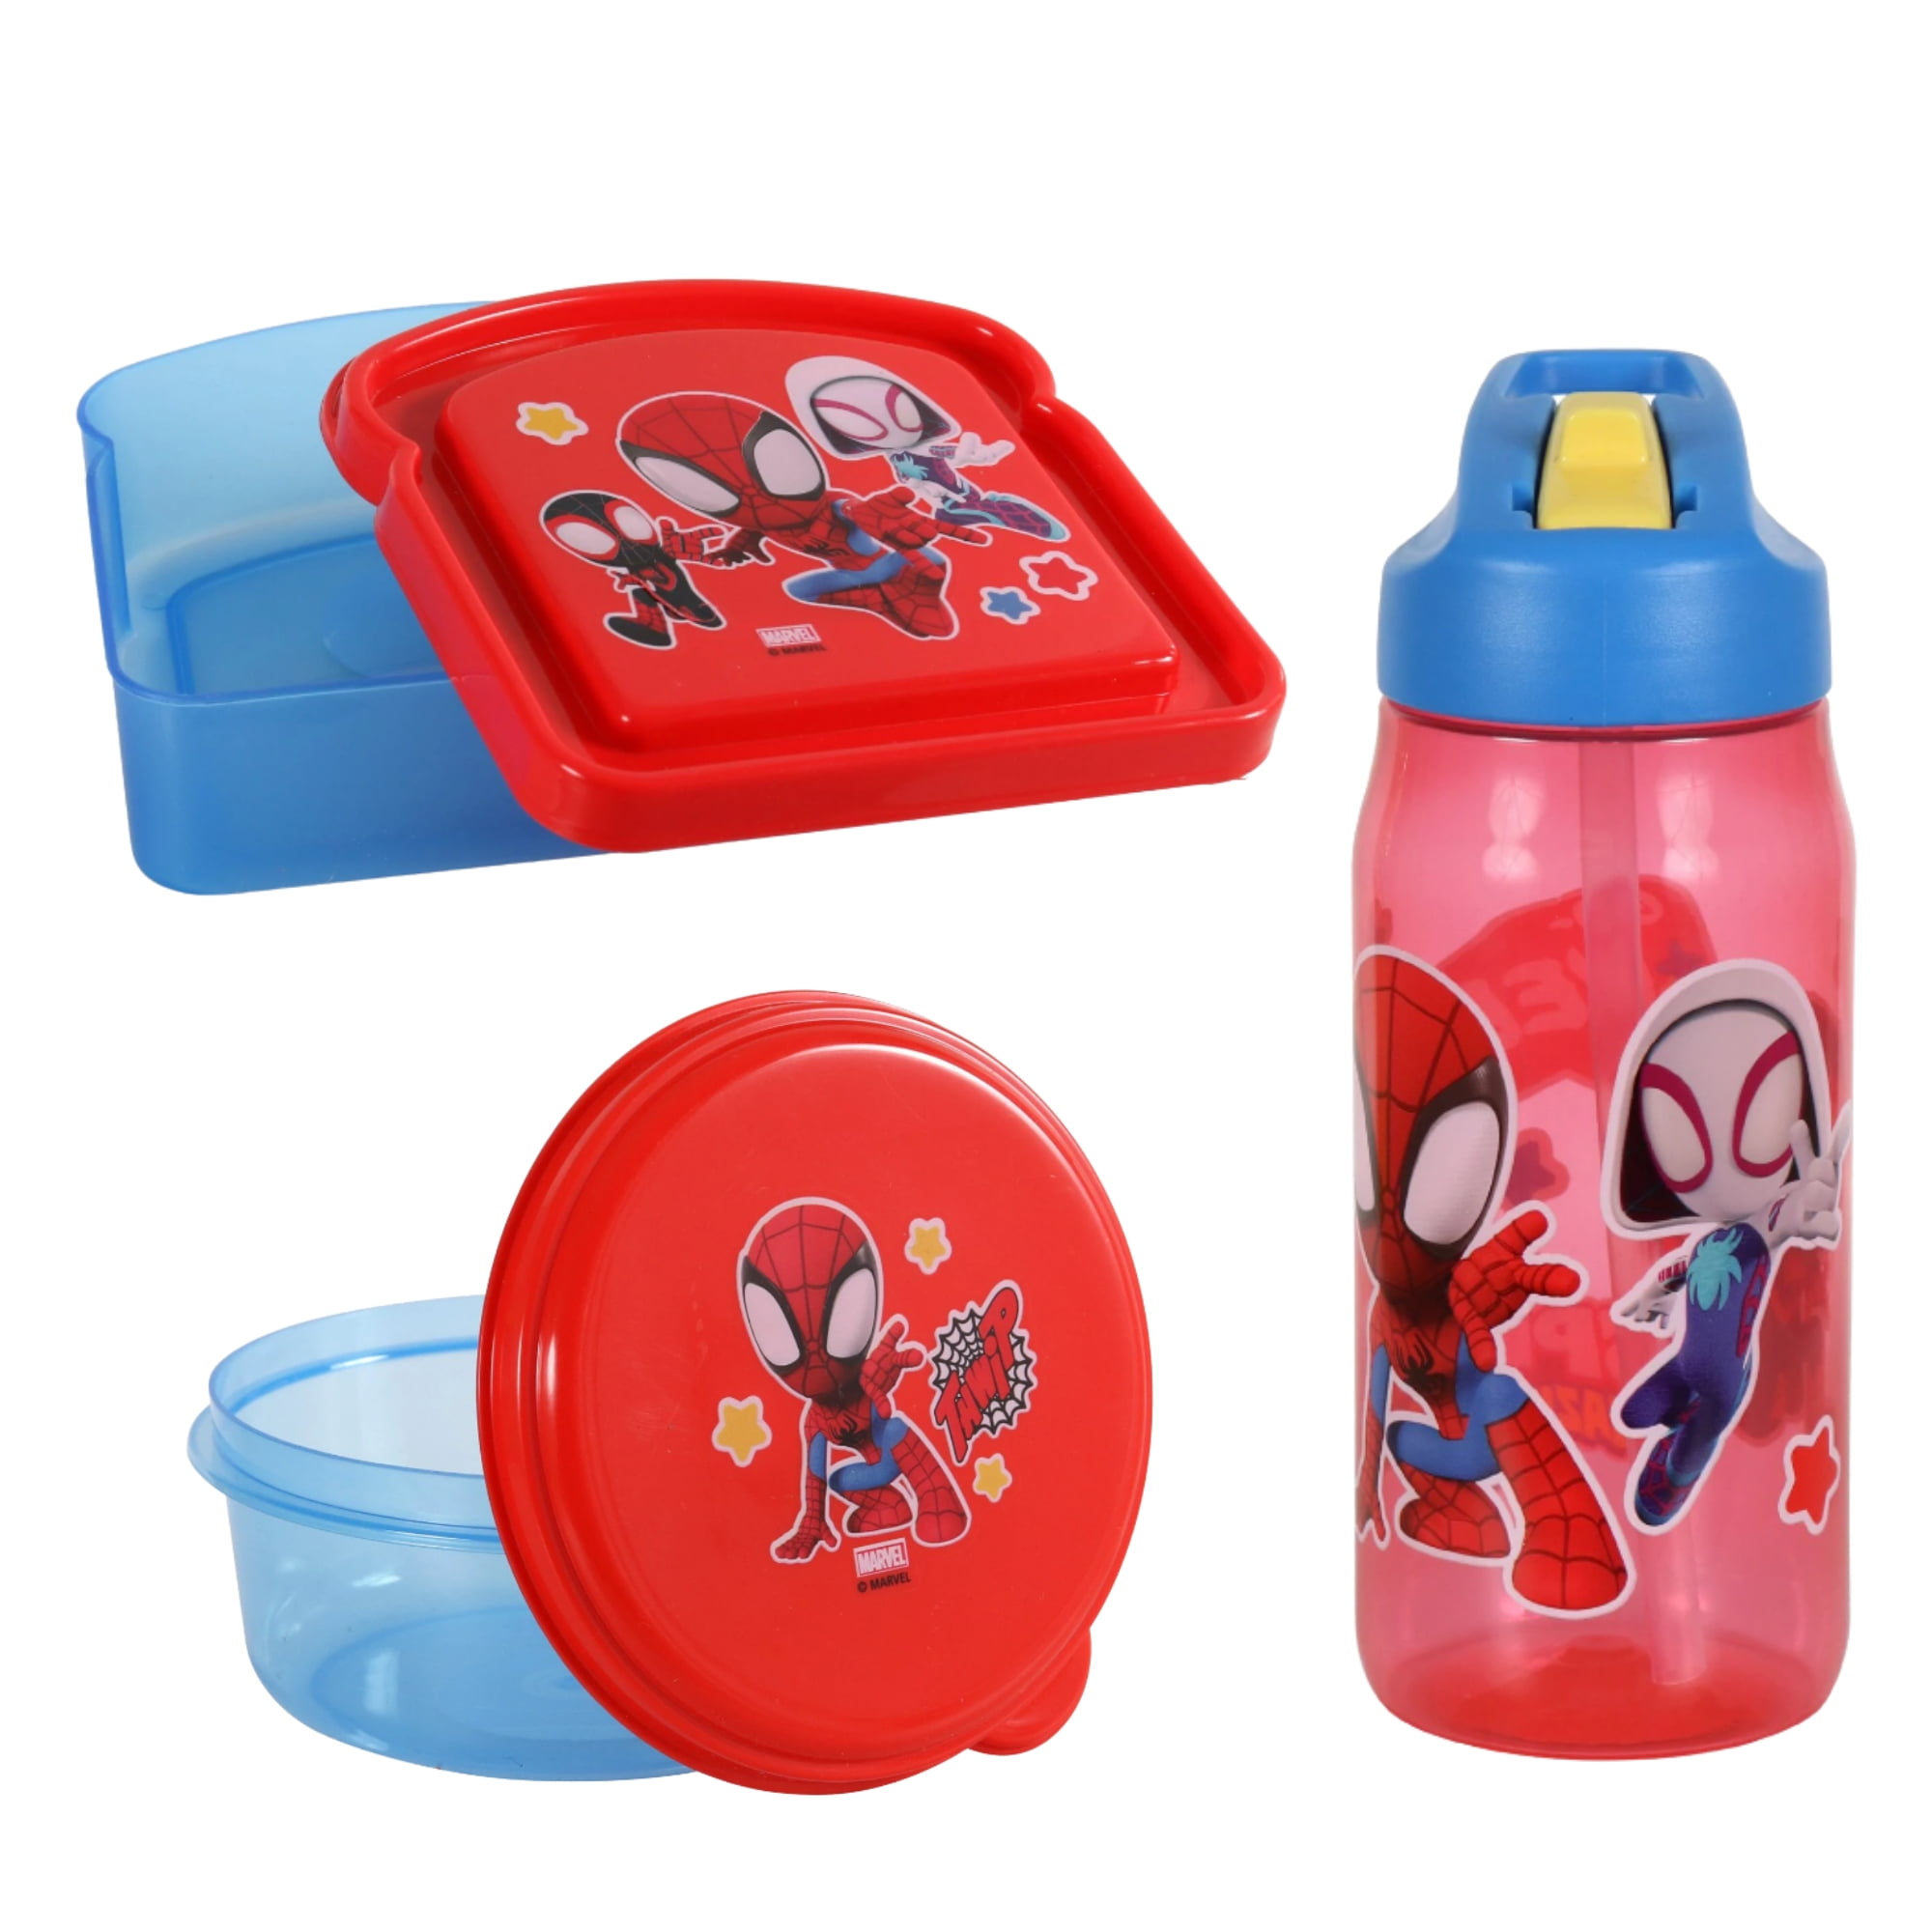 Bluey Lunch Box Kit for Kids Boys Includes Snacks Storage Sandwich  Container and Tumbler BPA-Free Dishwasher Safe Toddler-Friendly Lunch  Containers Home School Travel Nursery Food Plates Set of 3 